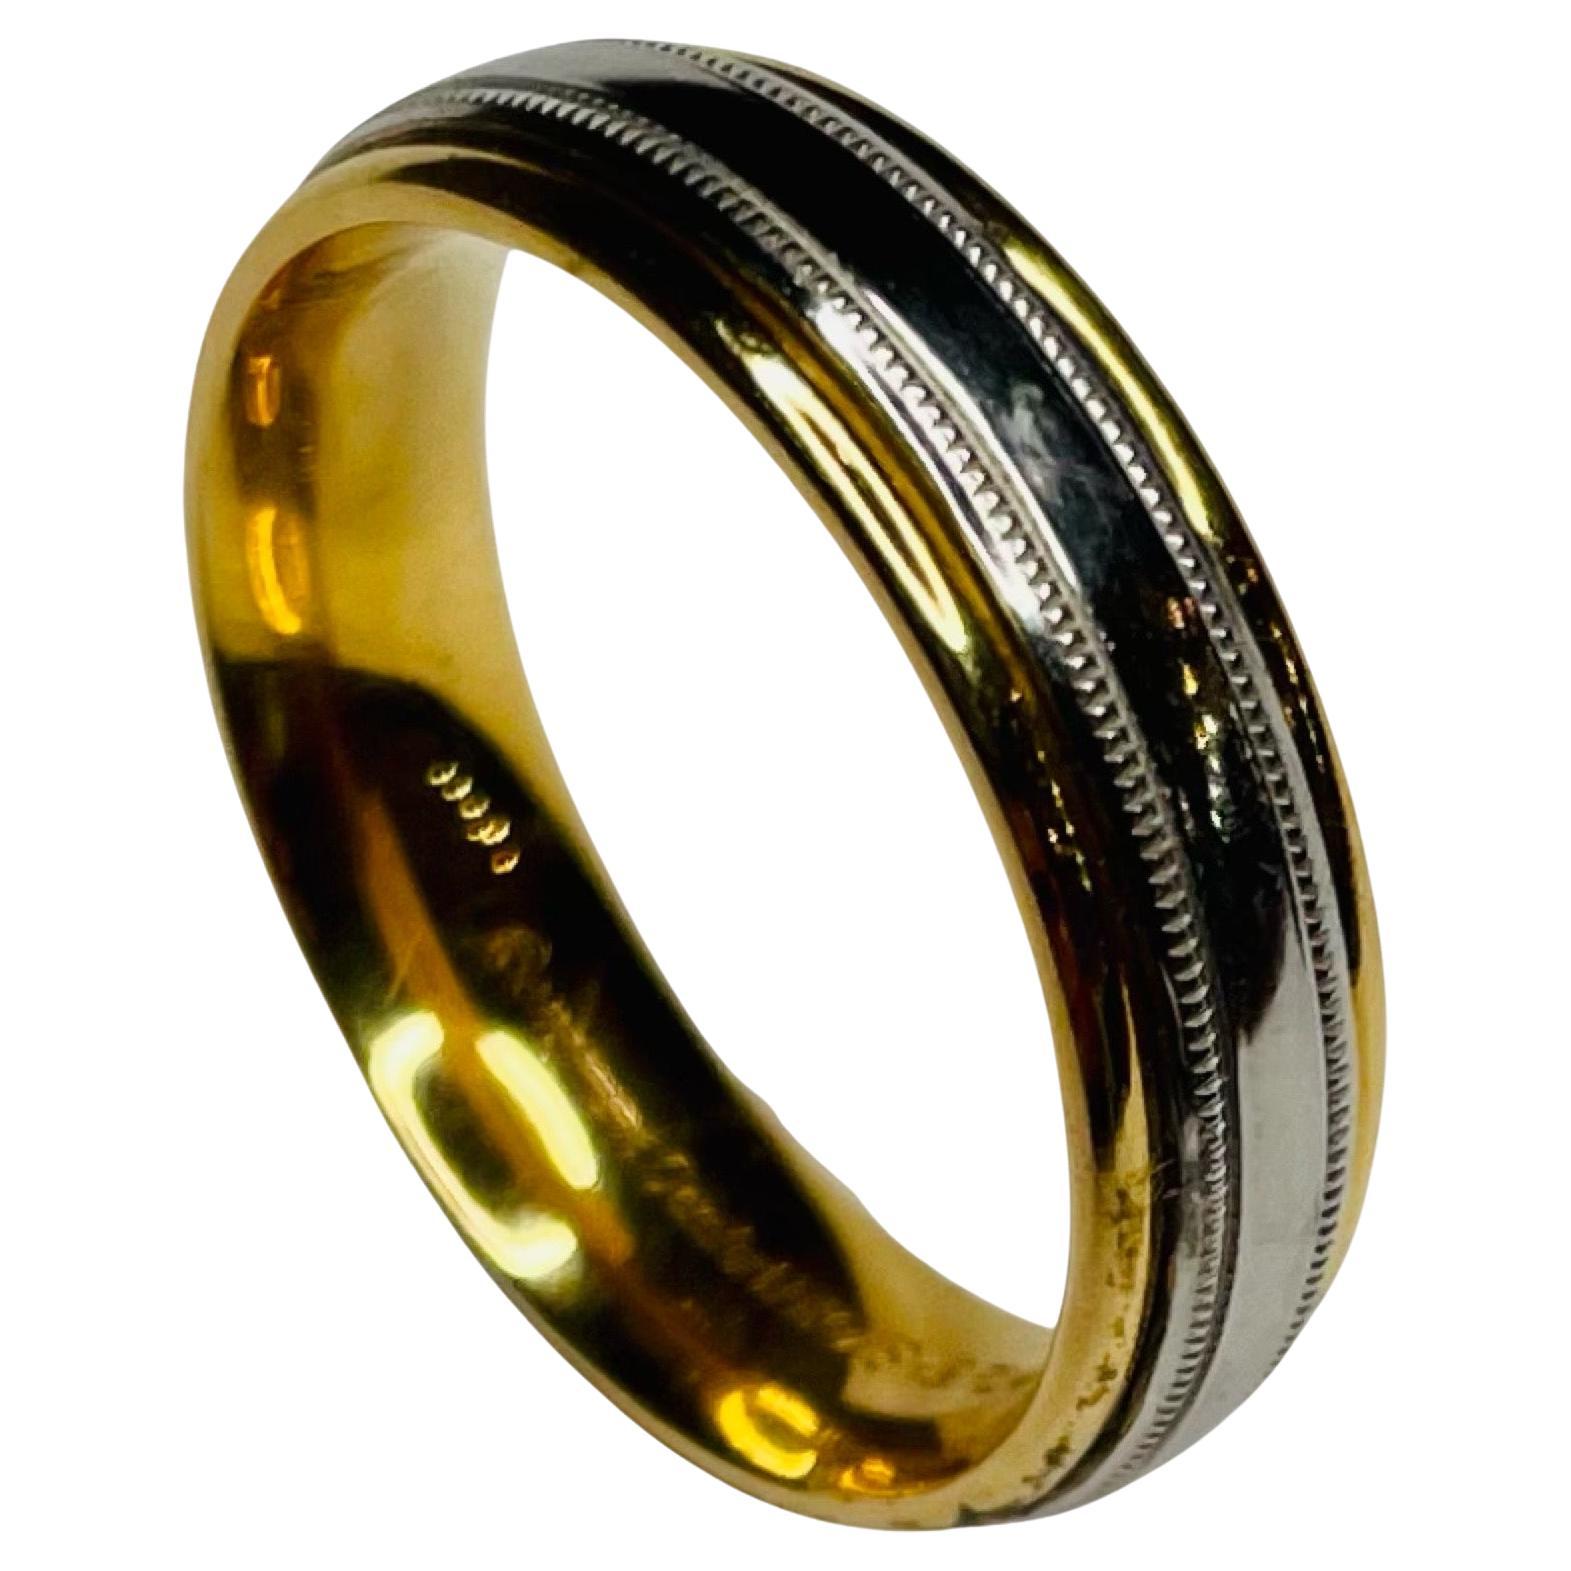 Benchmark Platinum and 18K Yellow Gold Comfort Fit Wedding Band